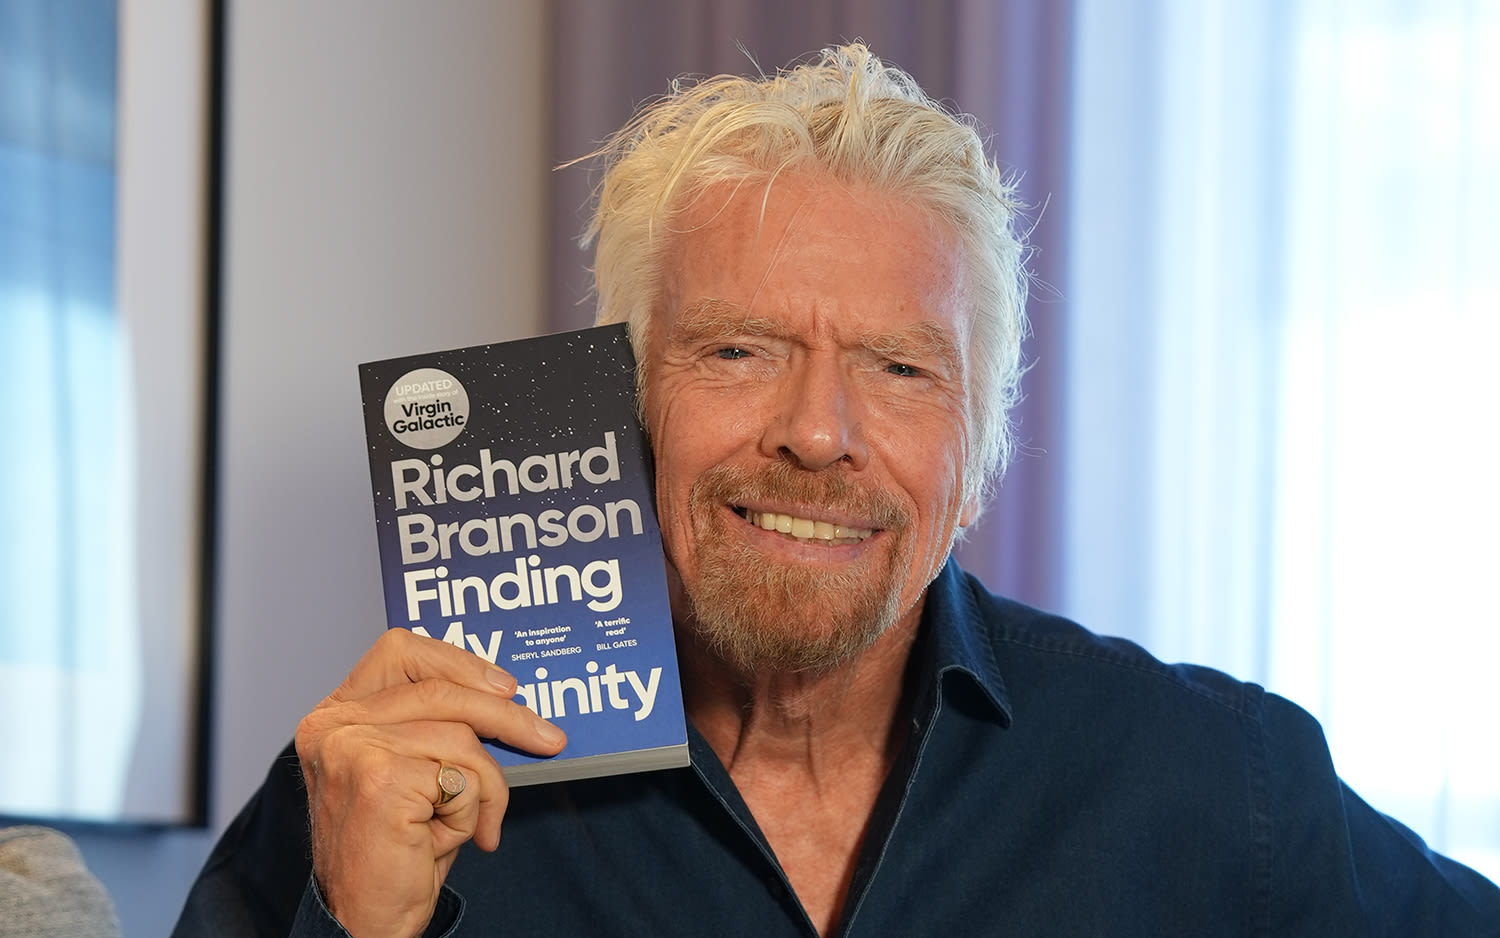 Richard Branson holding a copy of Finding My Virginity next to his face